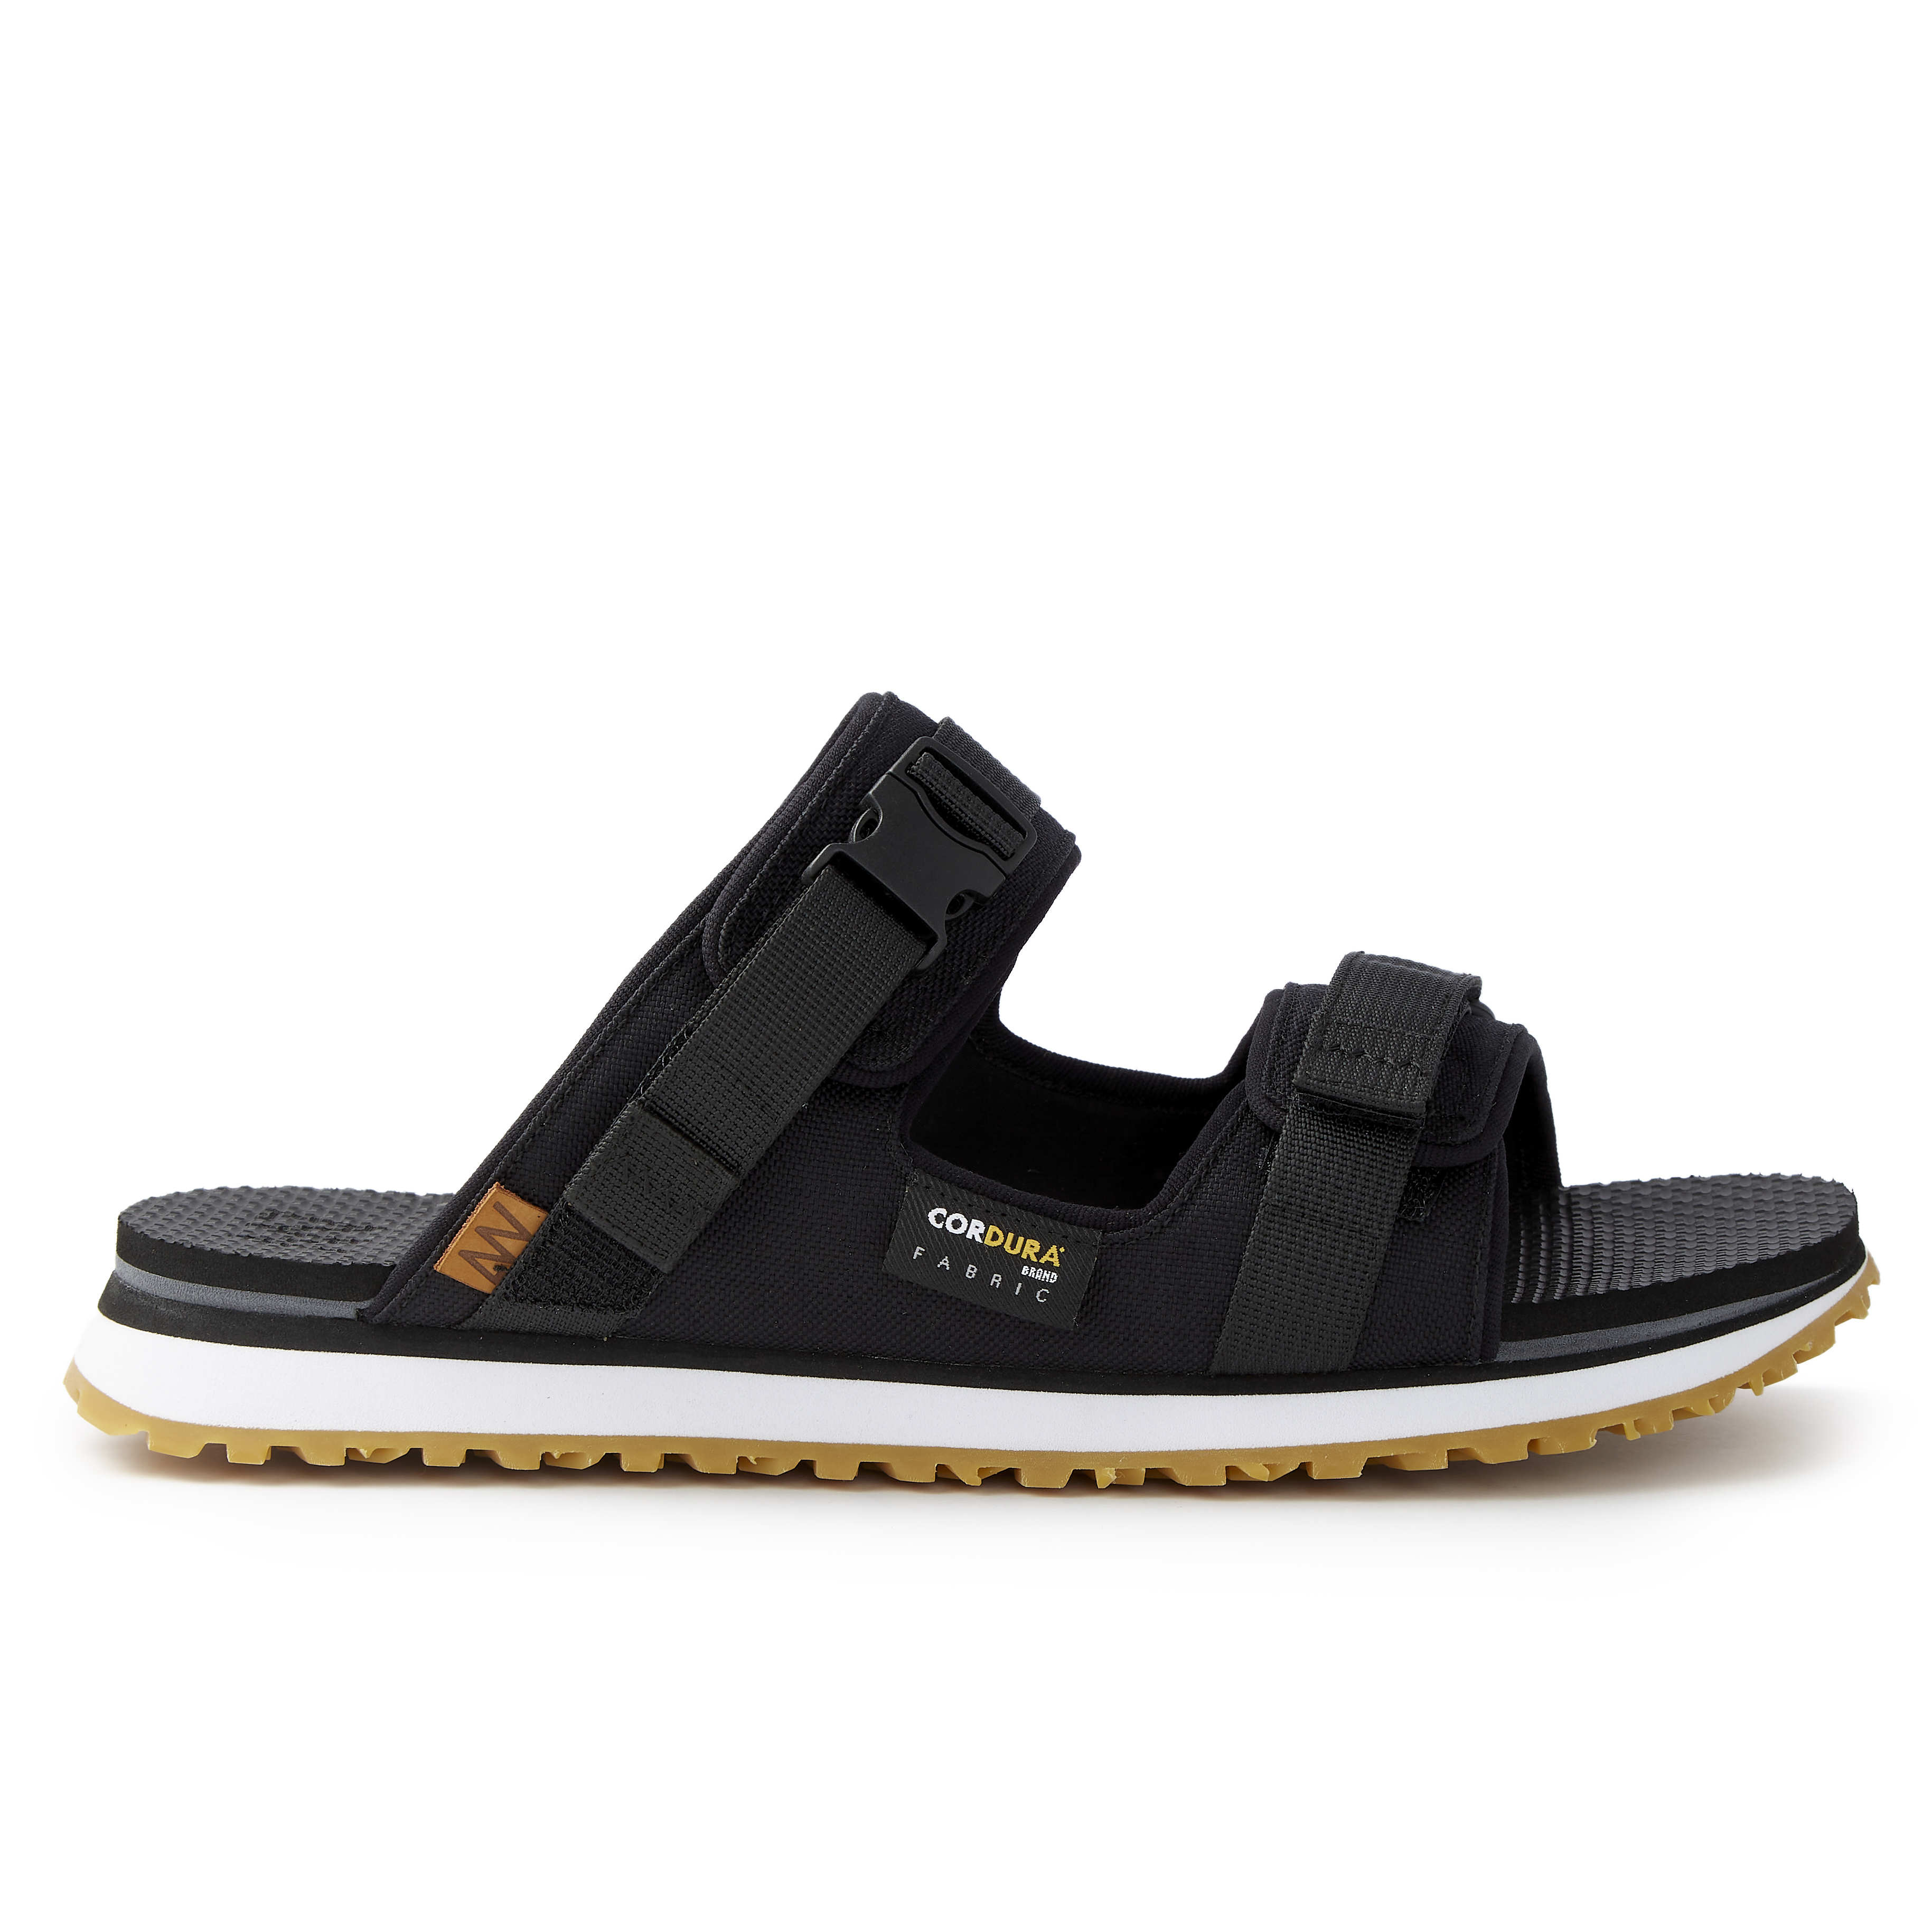 What are the best all-purpose sandals for men? - Quora